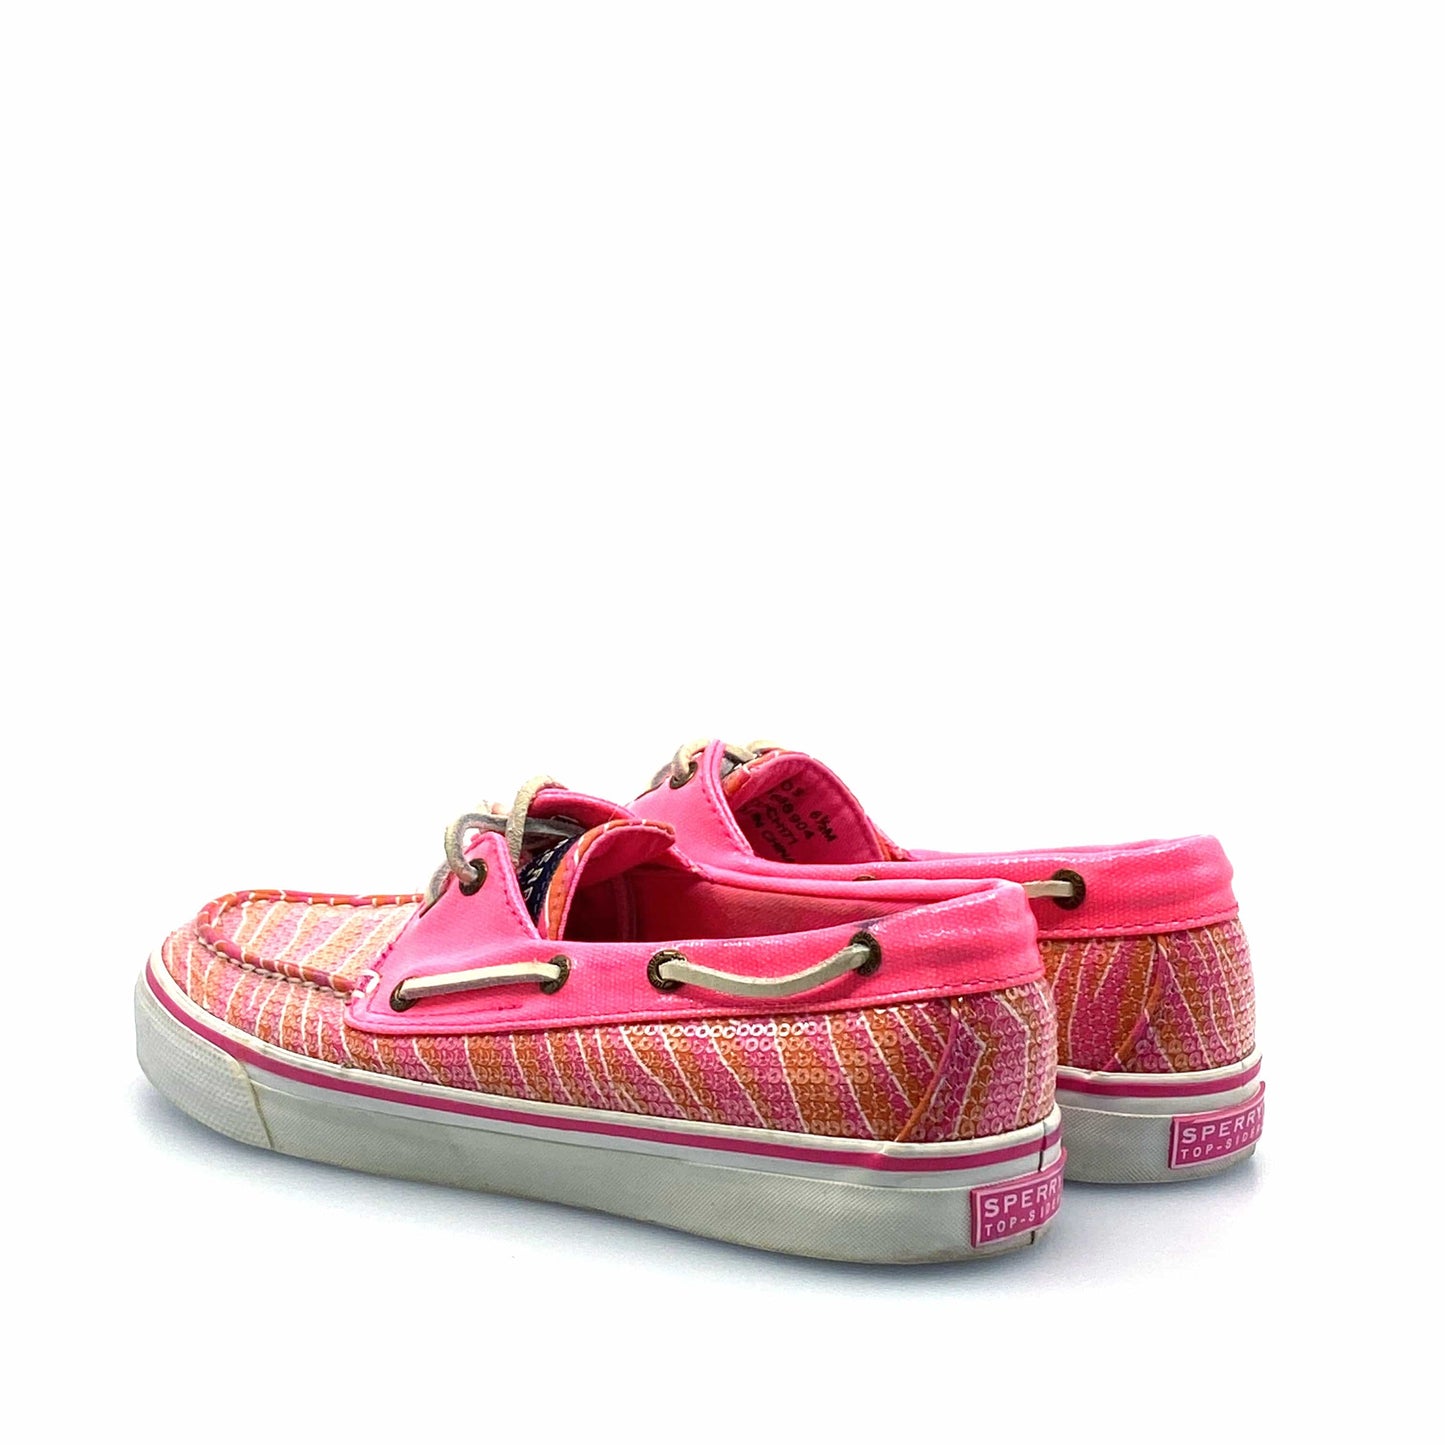 SPERRY Top-Sider Womens Size 6.5M Pink Sequined Boat Shoes Textured Patent Leather